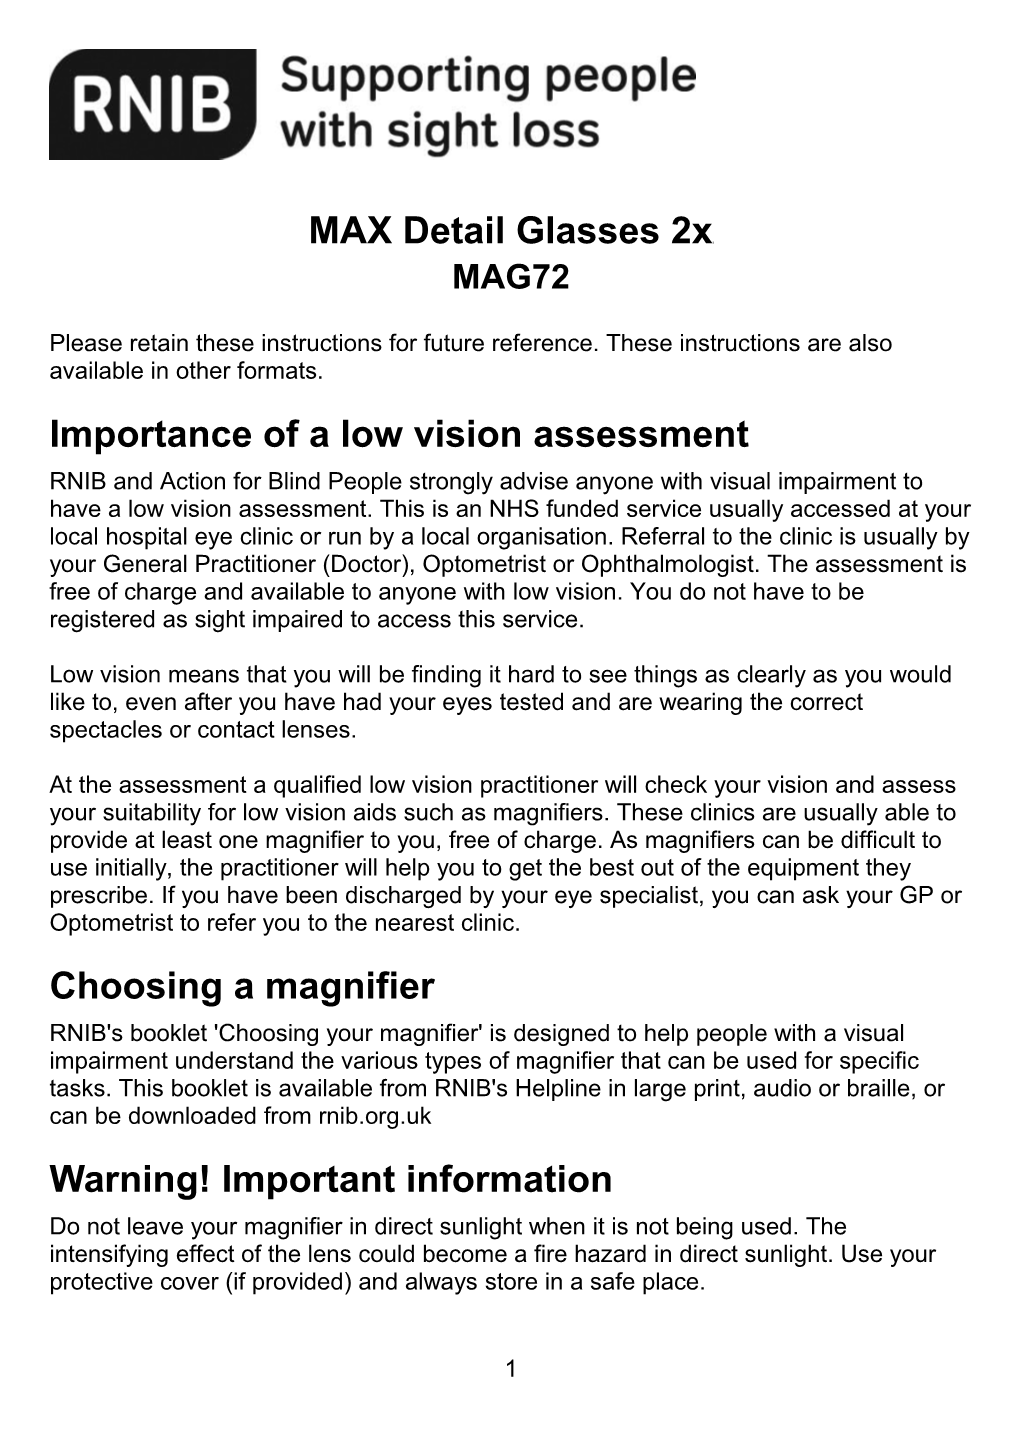 Importance of a Low Vision Assessment